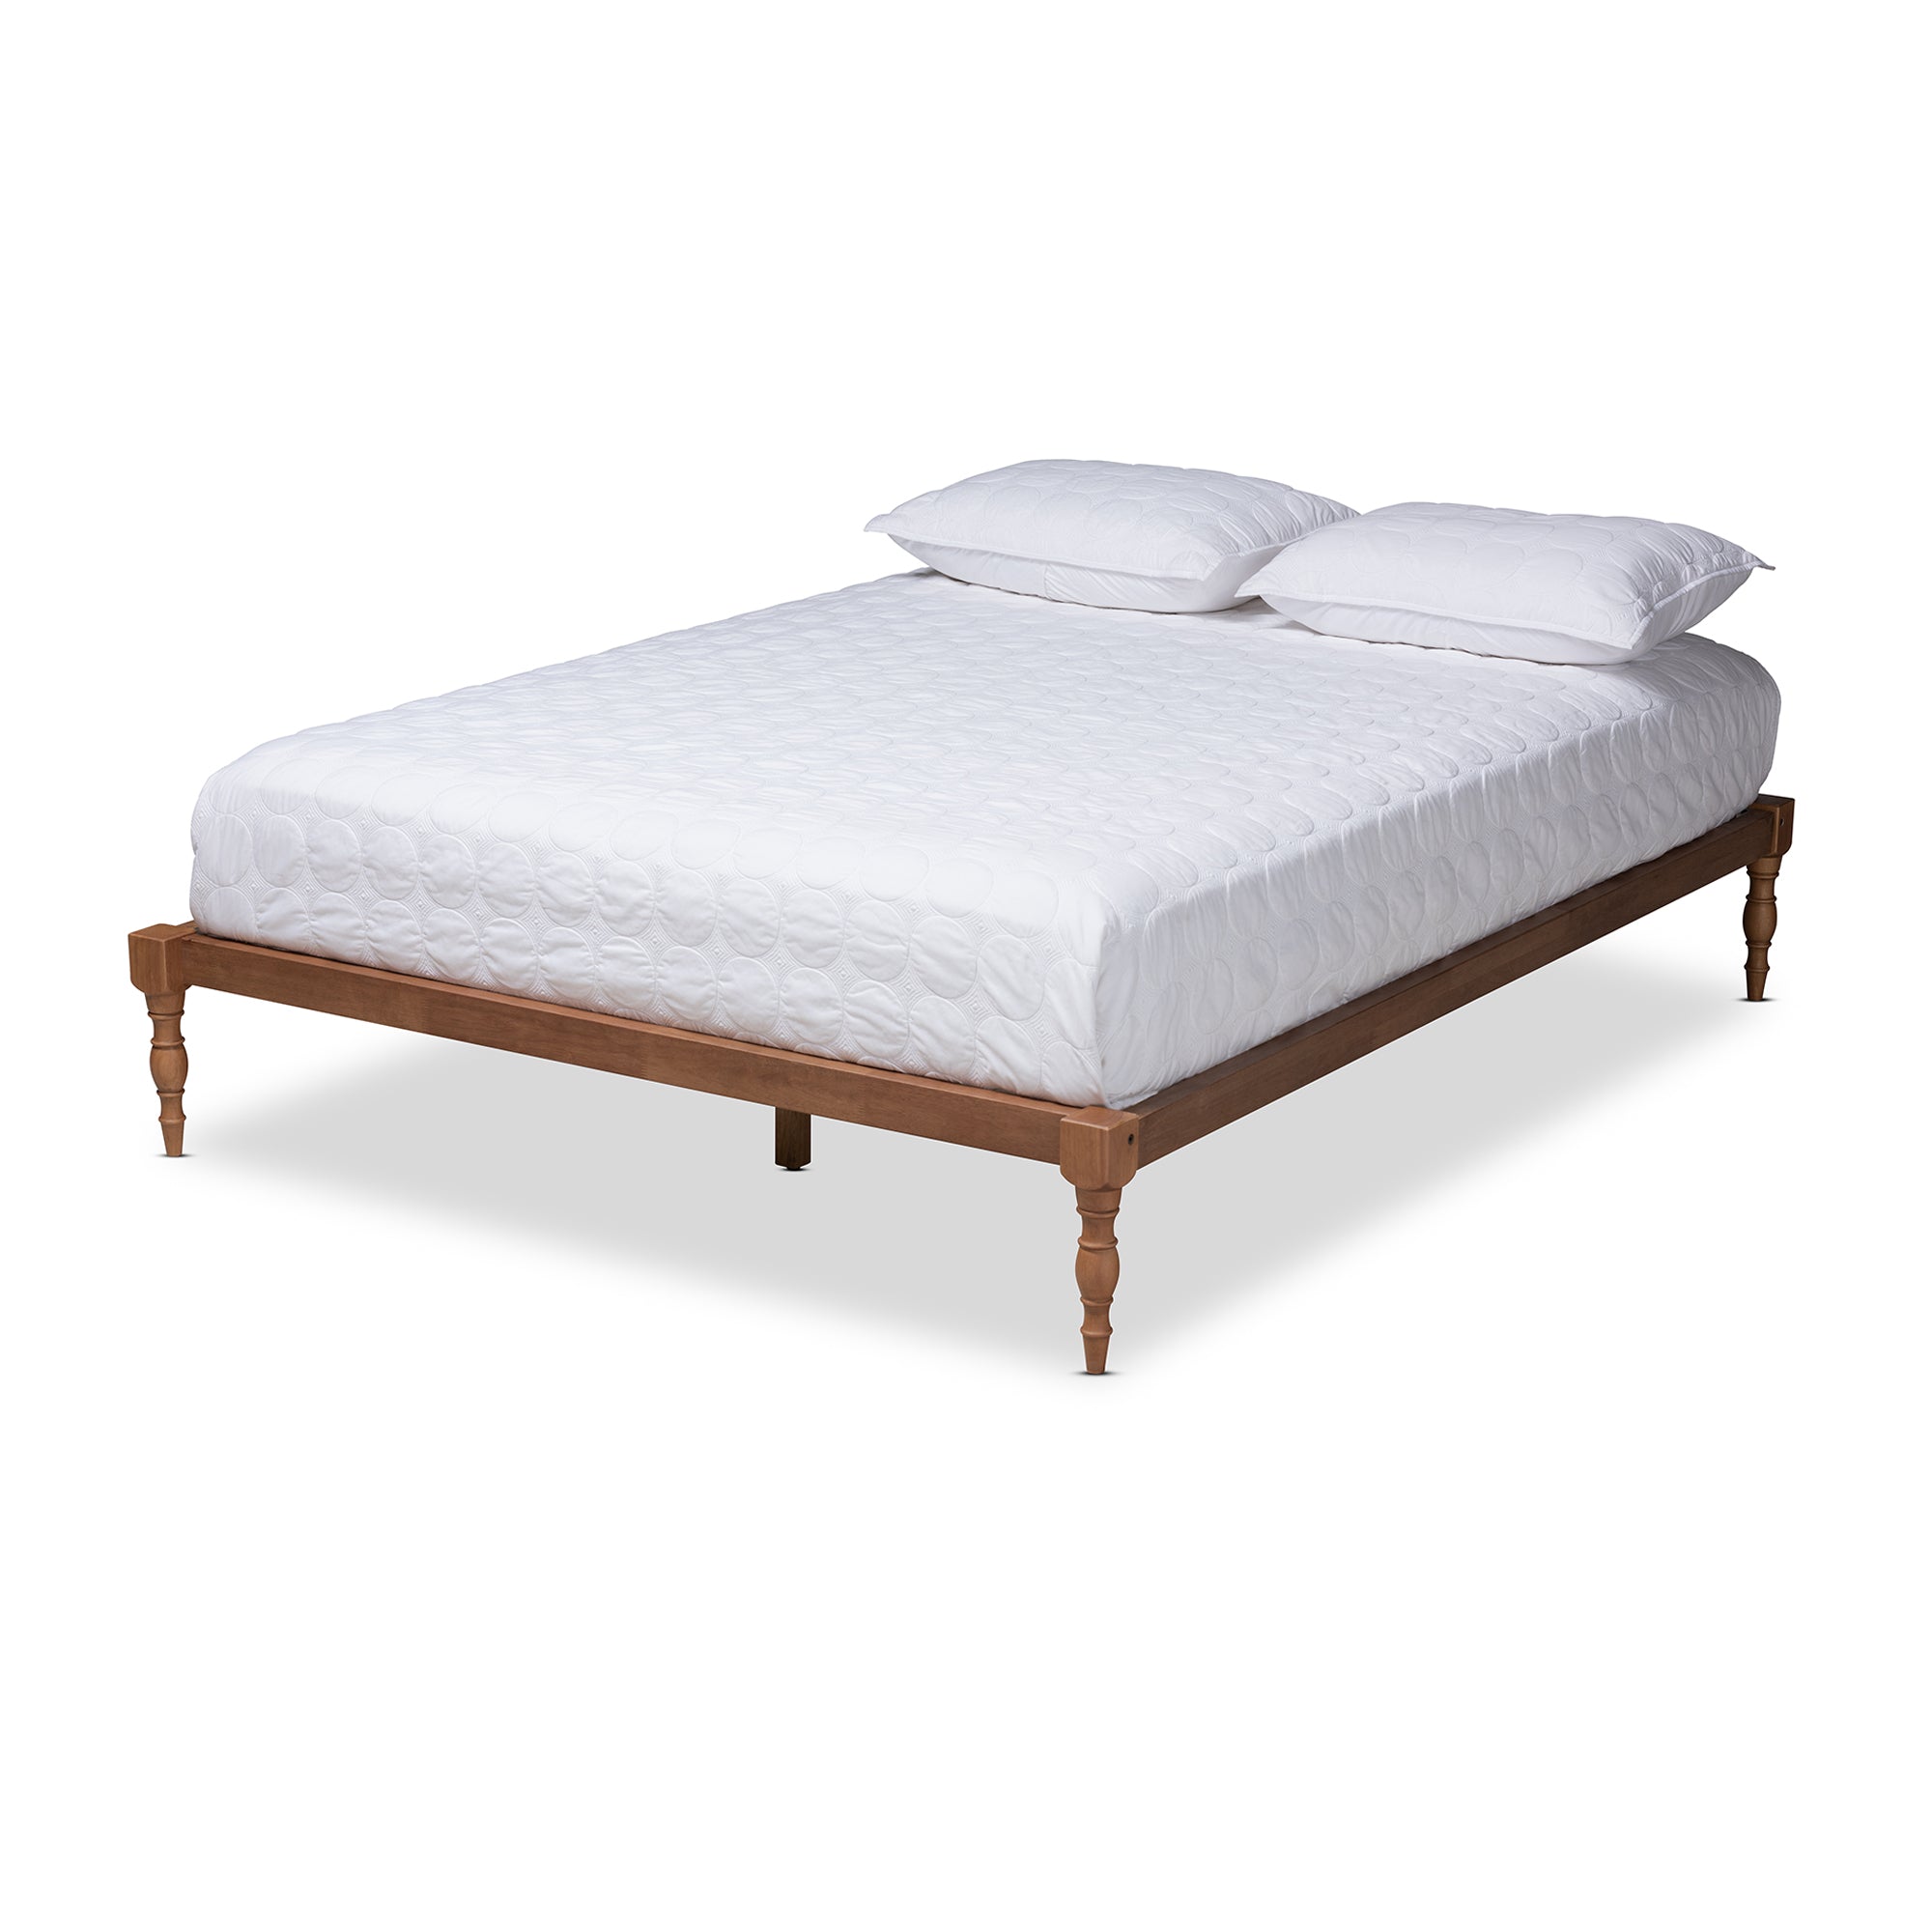 Iseline Contemporary Bed Frame-Bed Frame-Baxton Studio - WI-Wall2Wall Furnishings